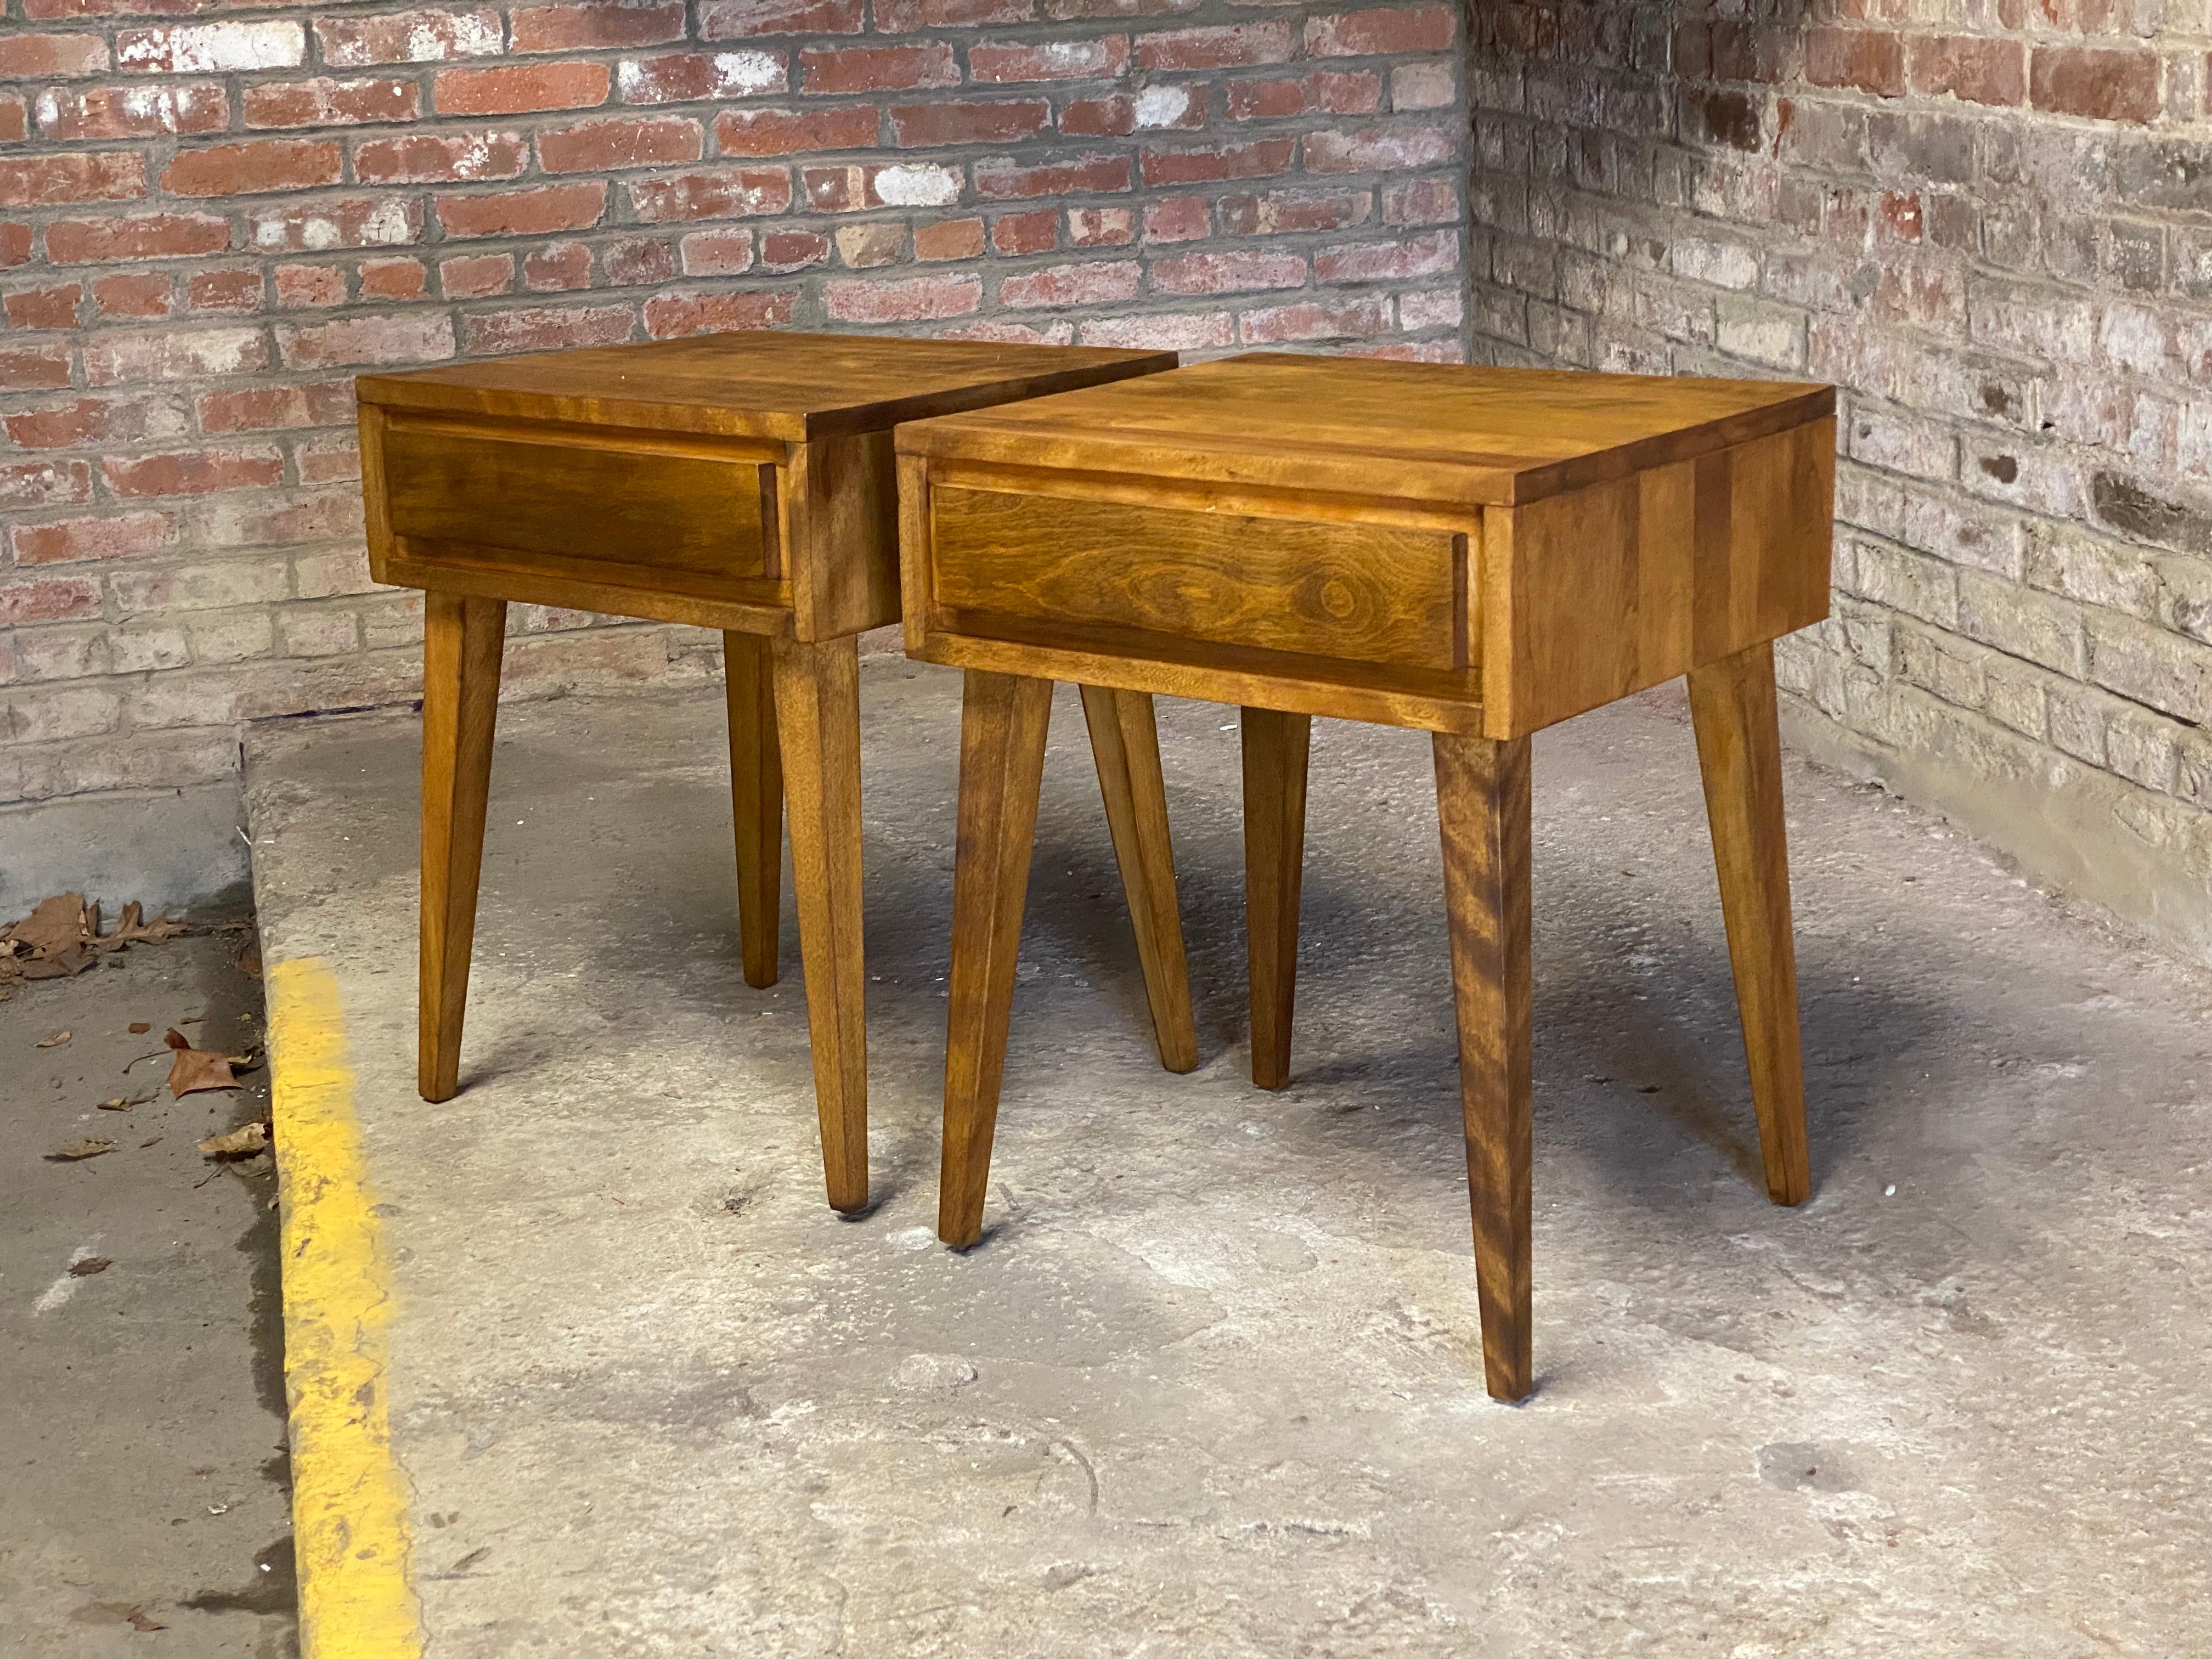 Classic simplicity by Leslie Diamond for Conant Ball American Modern Modern Mates line. Constructed from solid and durable hardwood maple and built to last. Circa 1950. These end tables can function in any office, bedroom or living room area. They